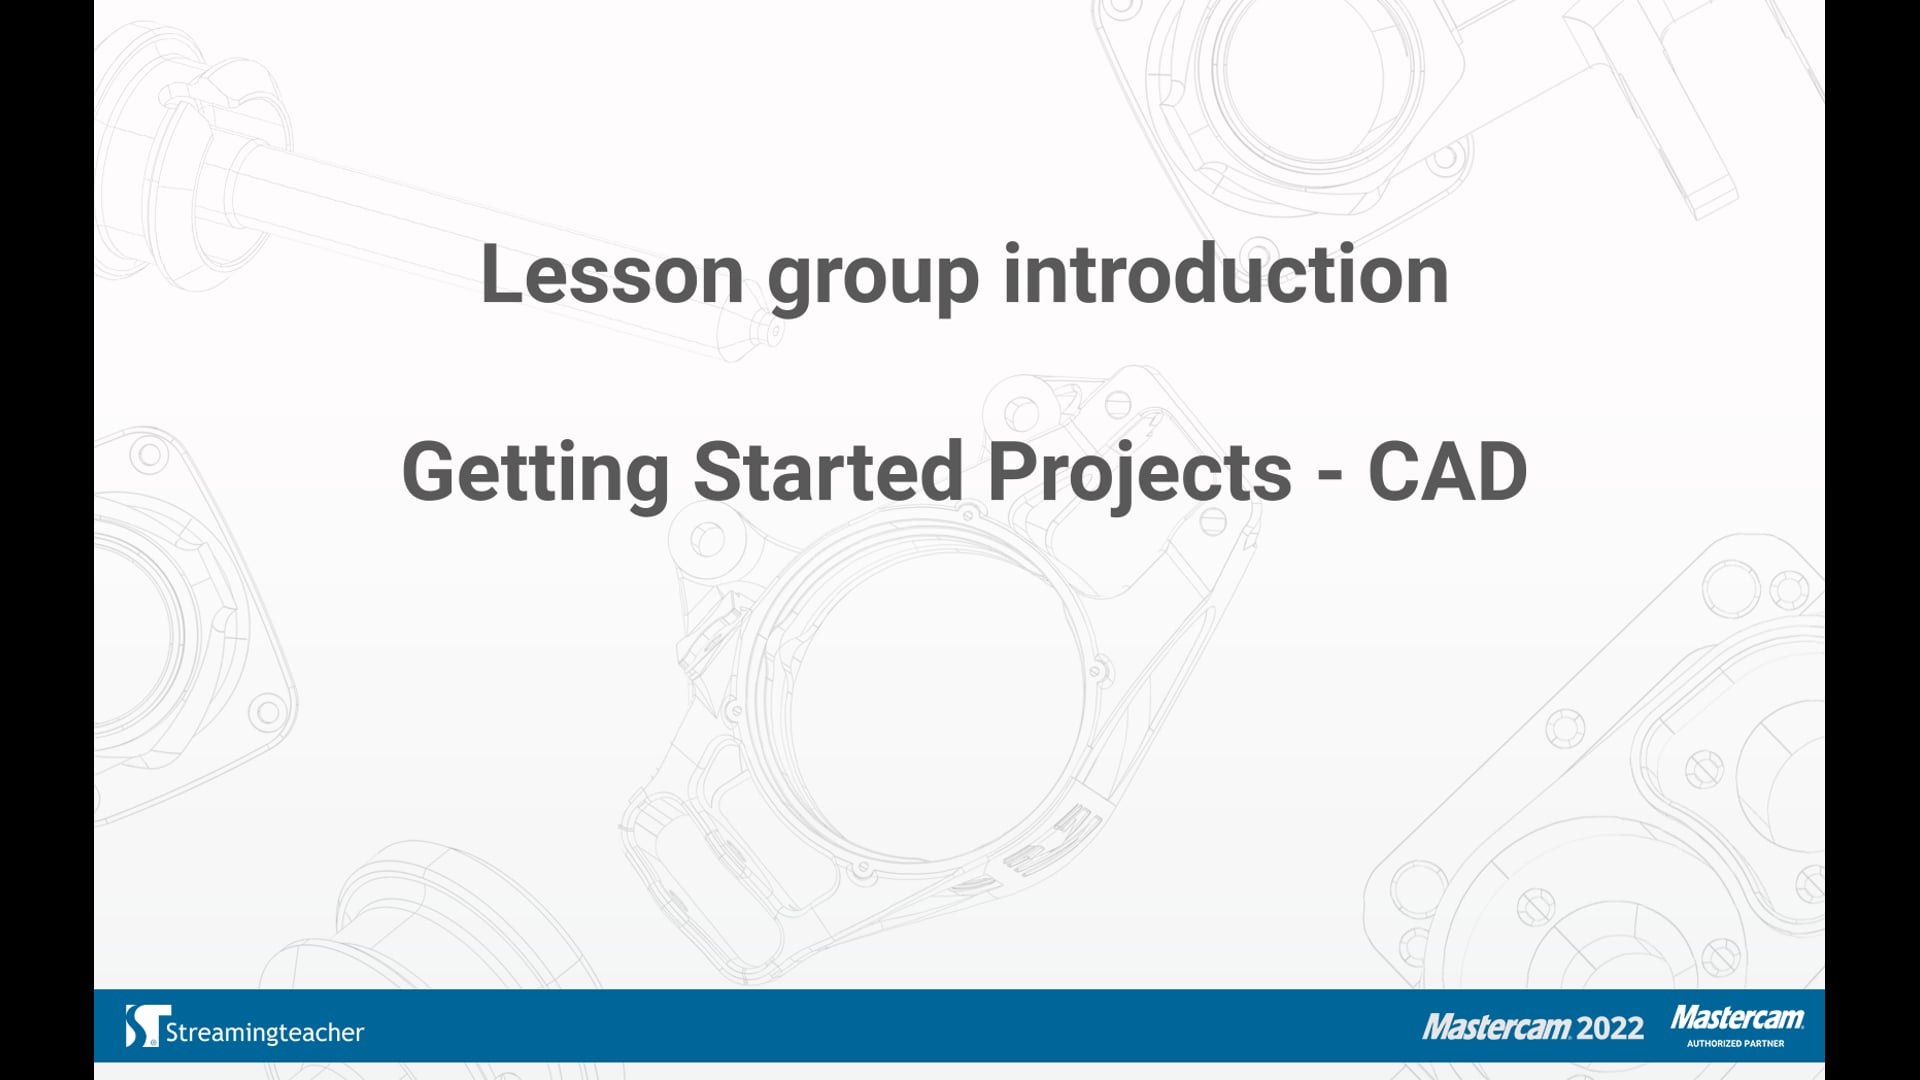 Getting Started Projects - CAD